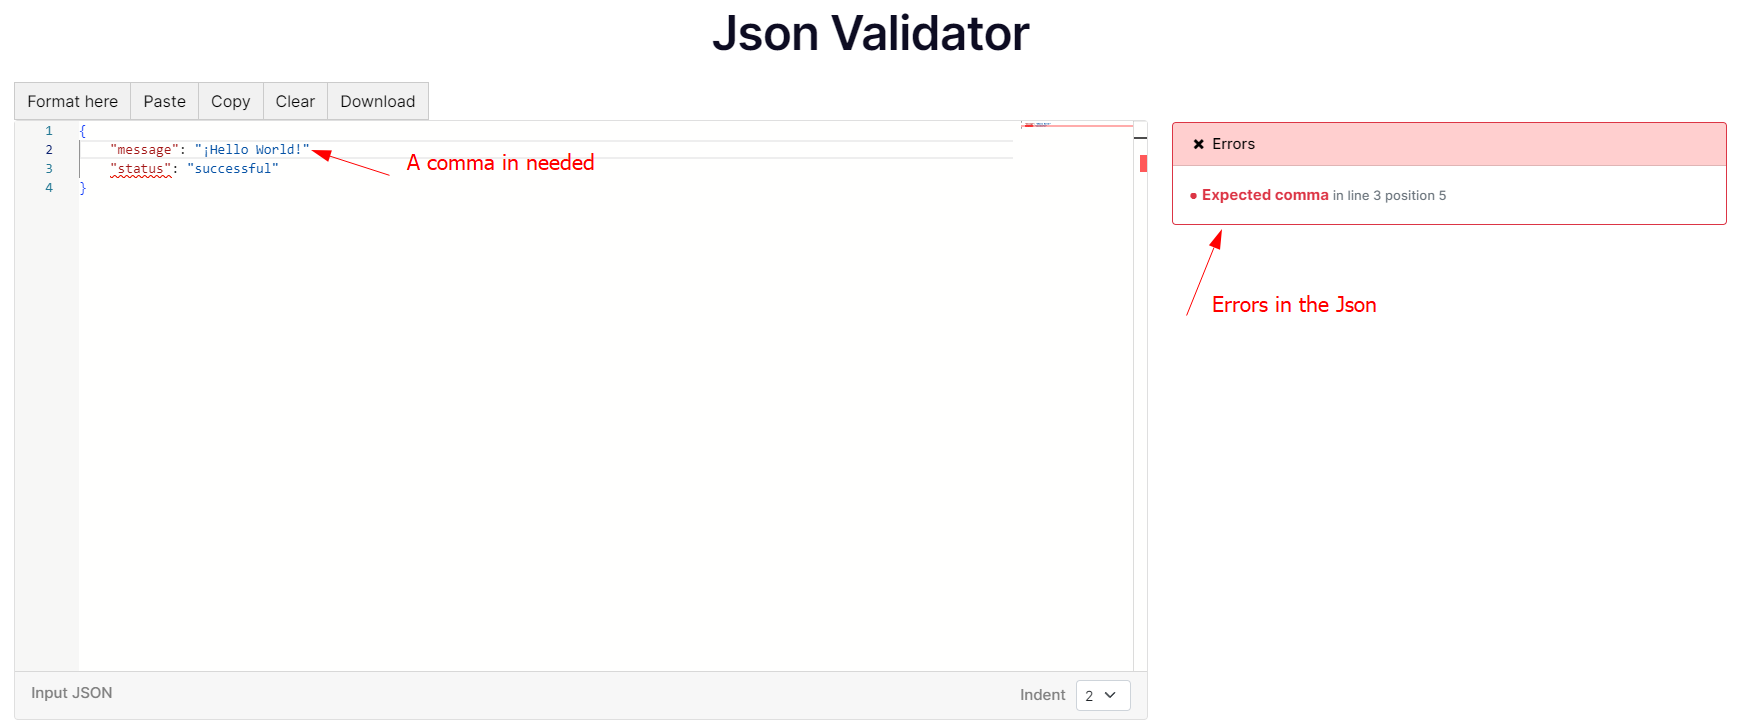 Json Validator Tools Ensure Data Integrity With Reliable Json Validation 4542